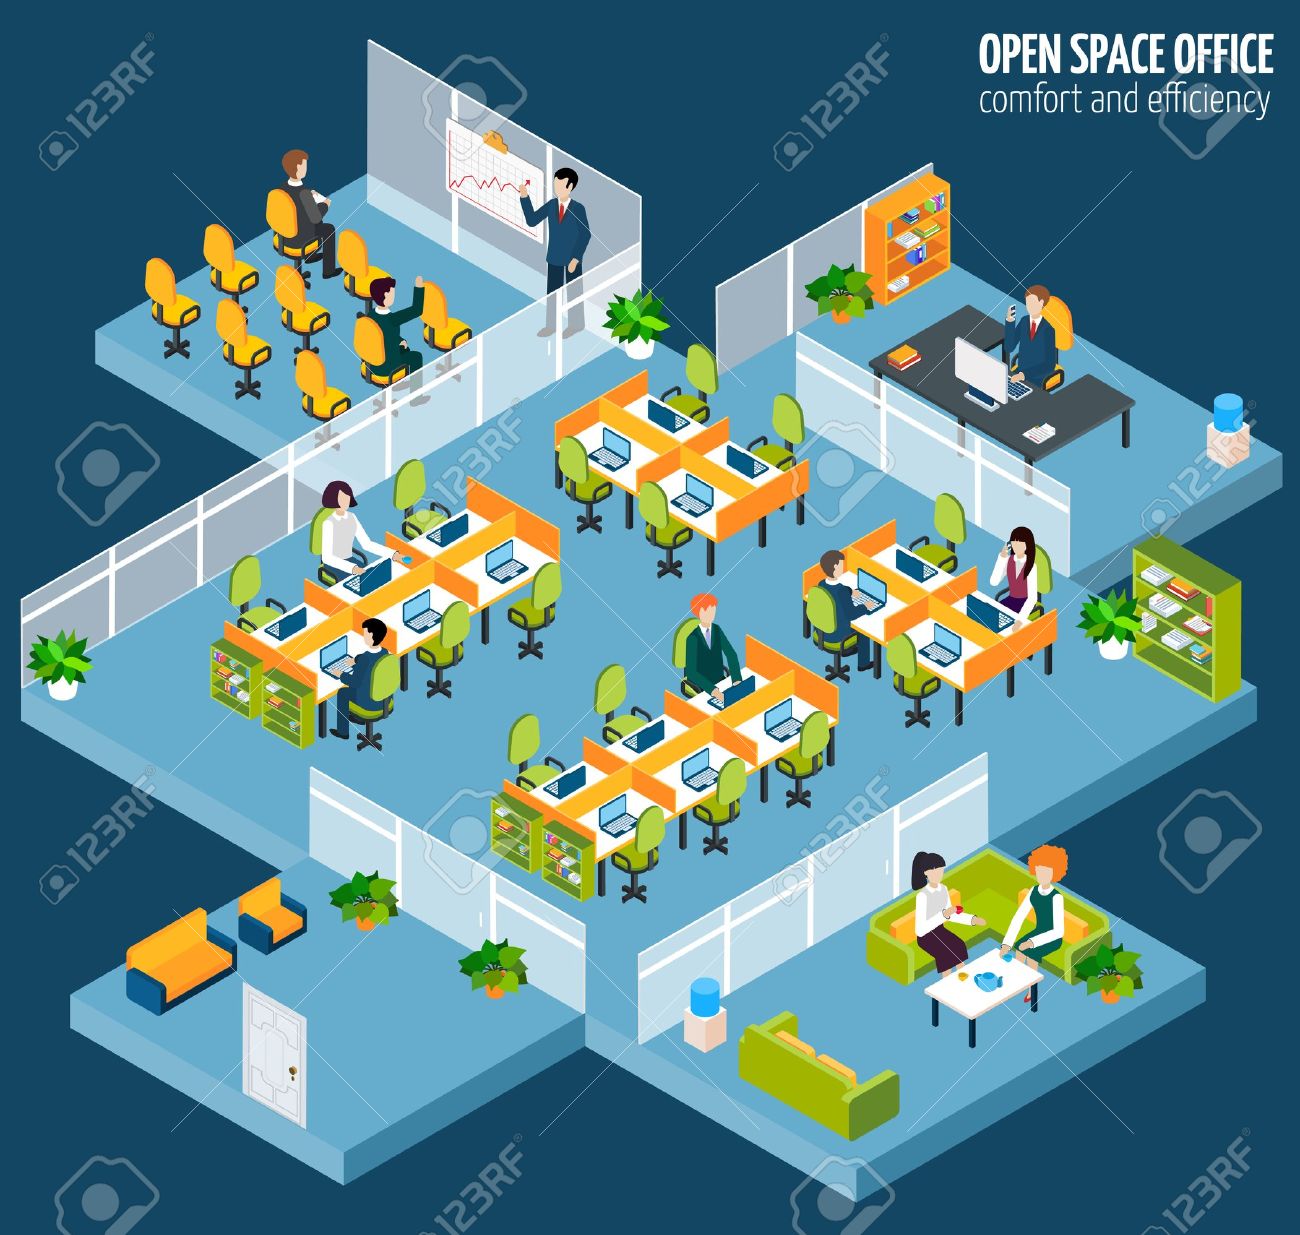 free clipart office space - photo #17